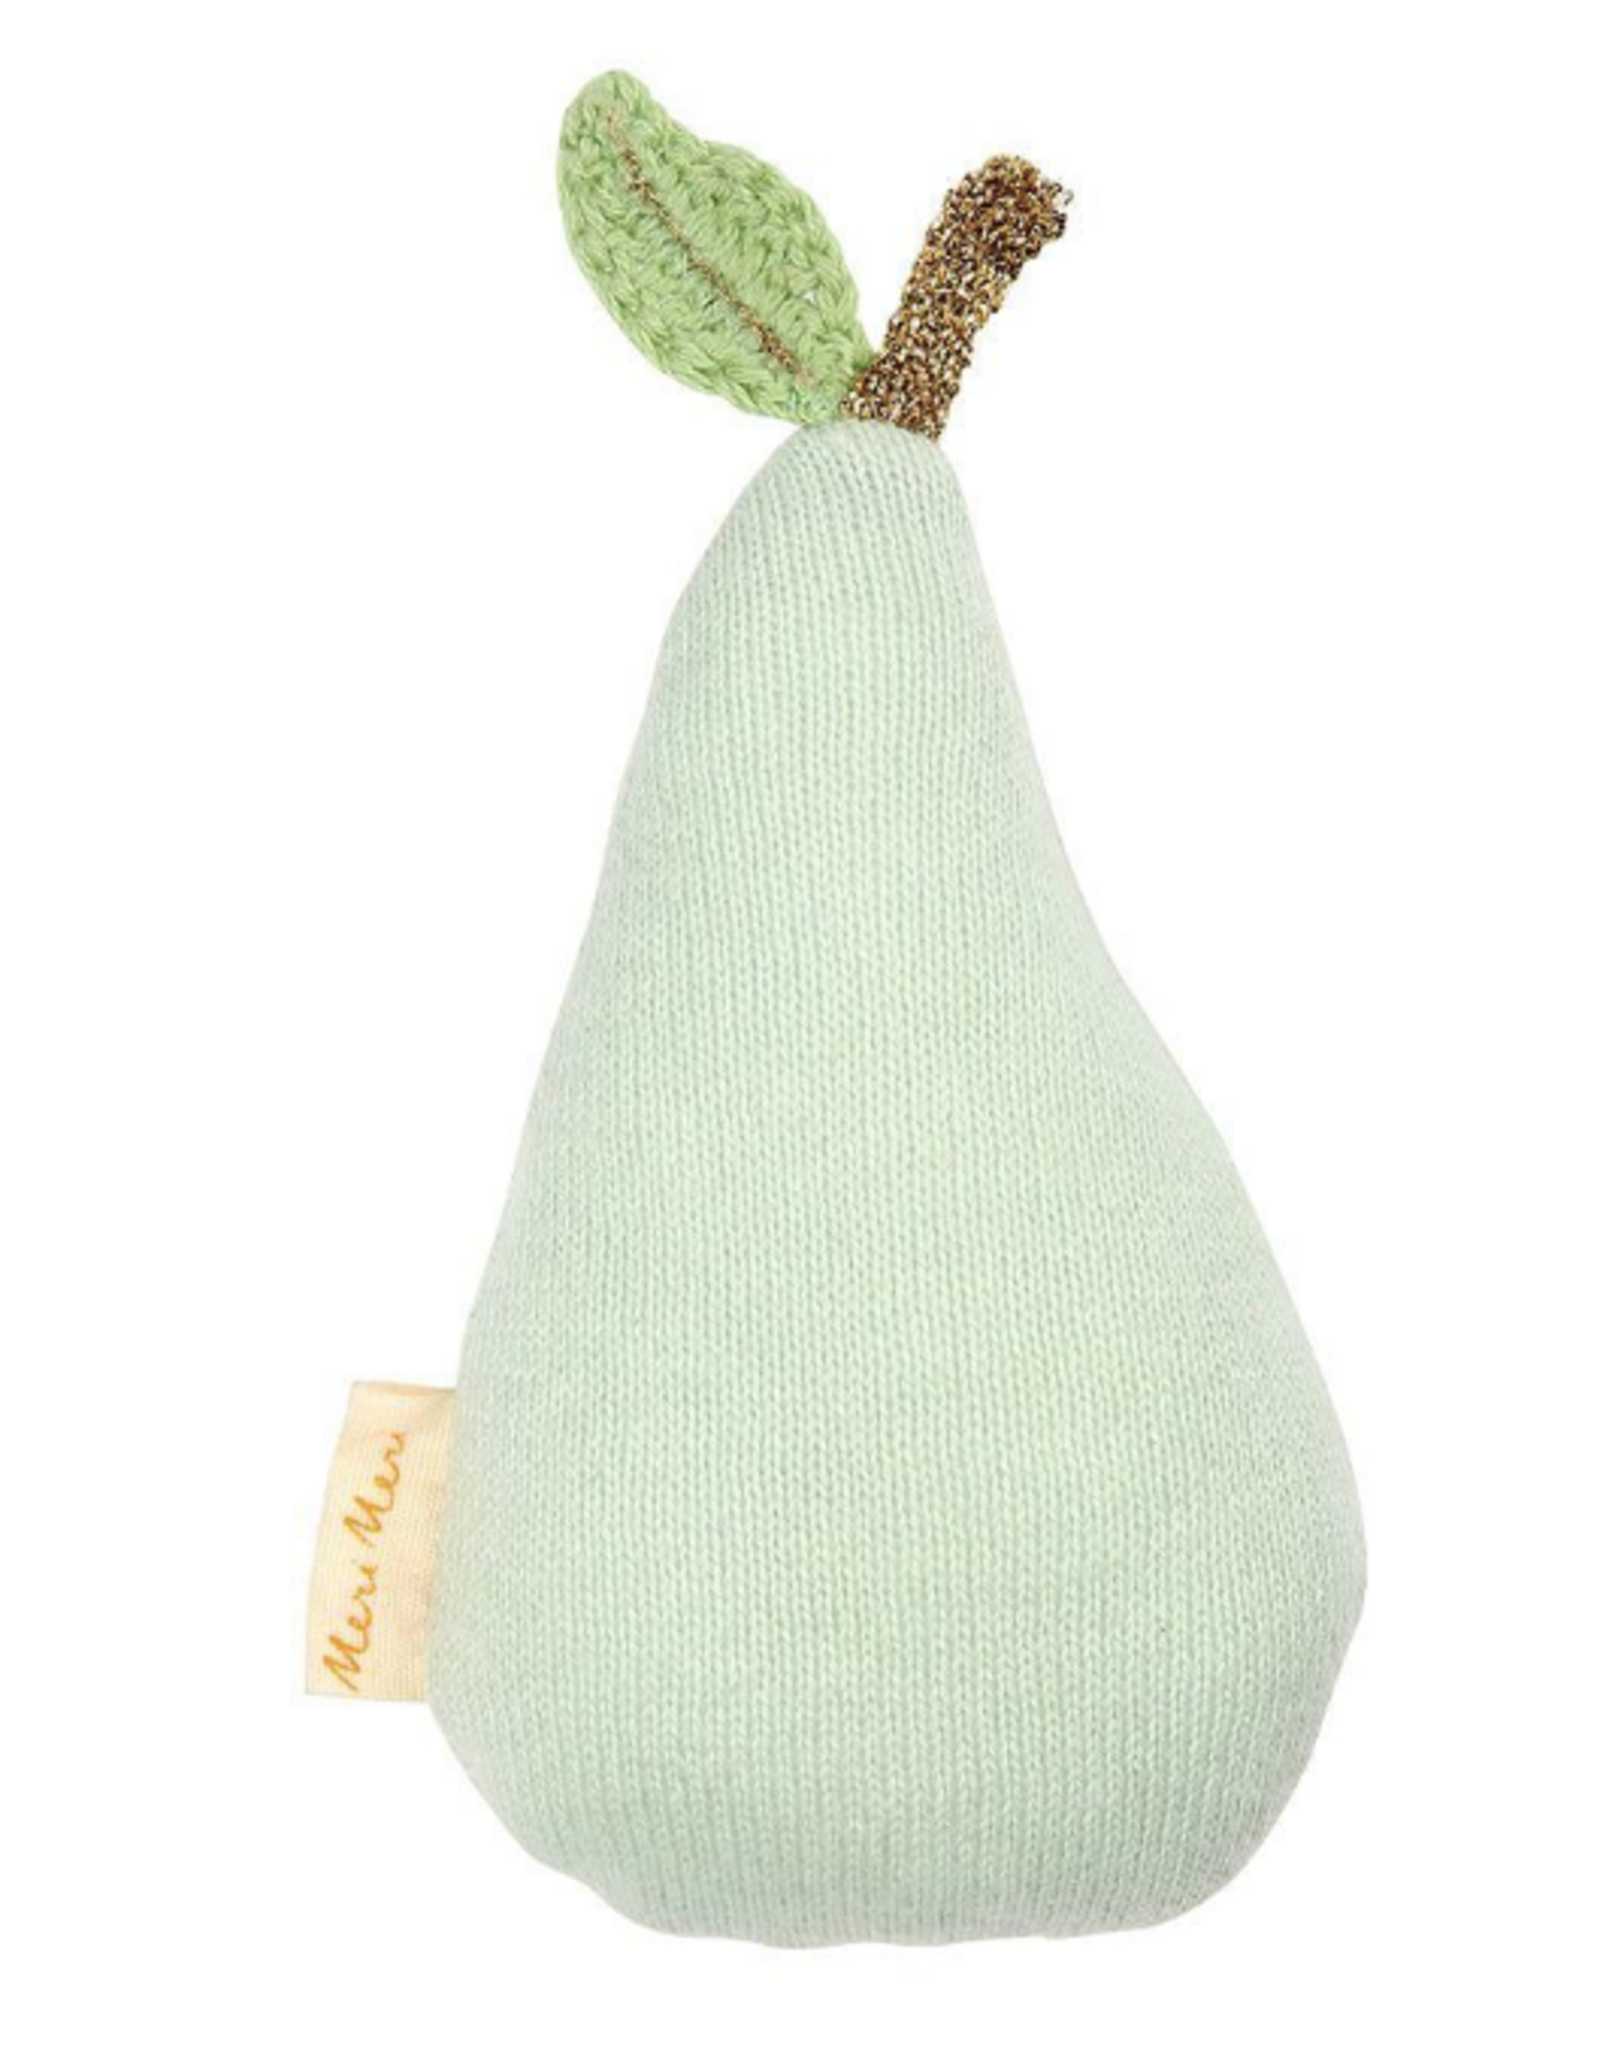 Pear Rattle